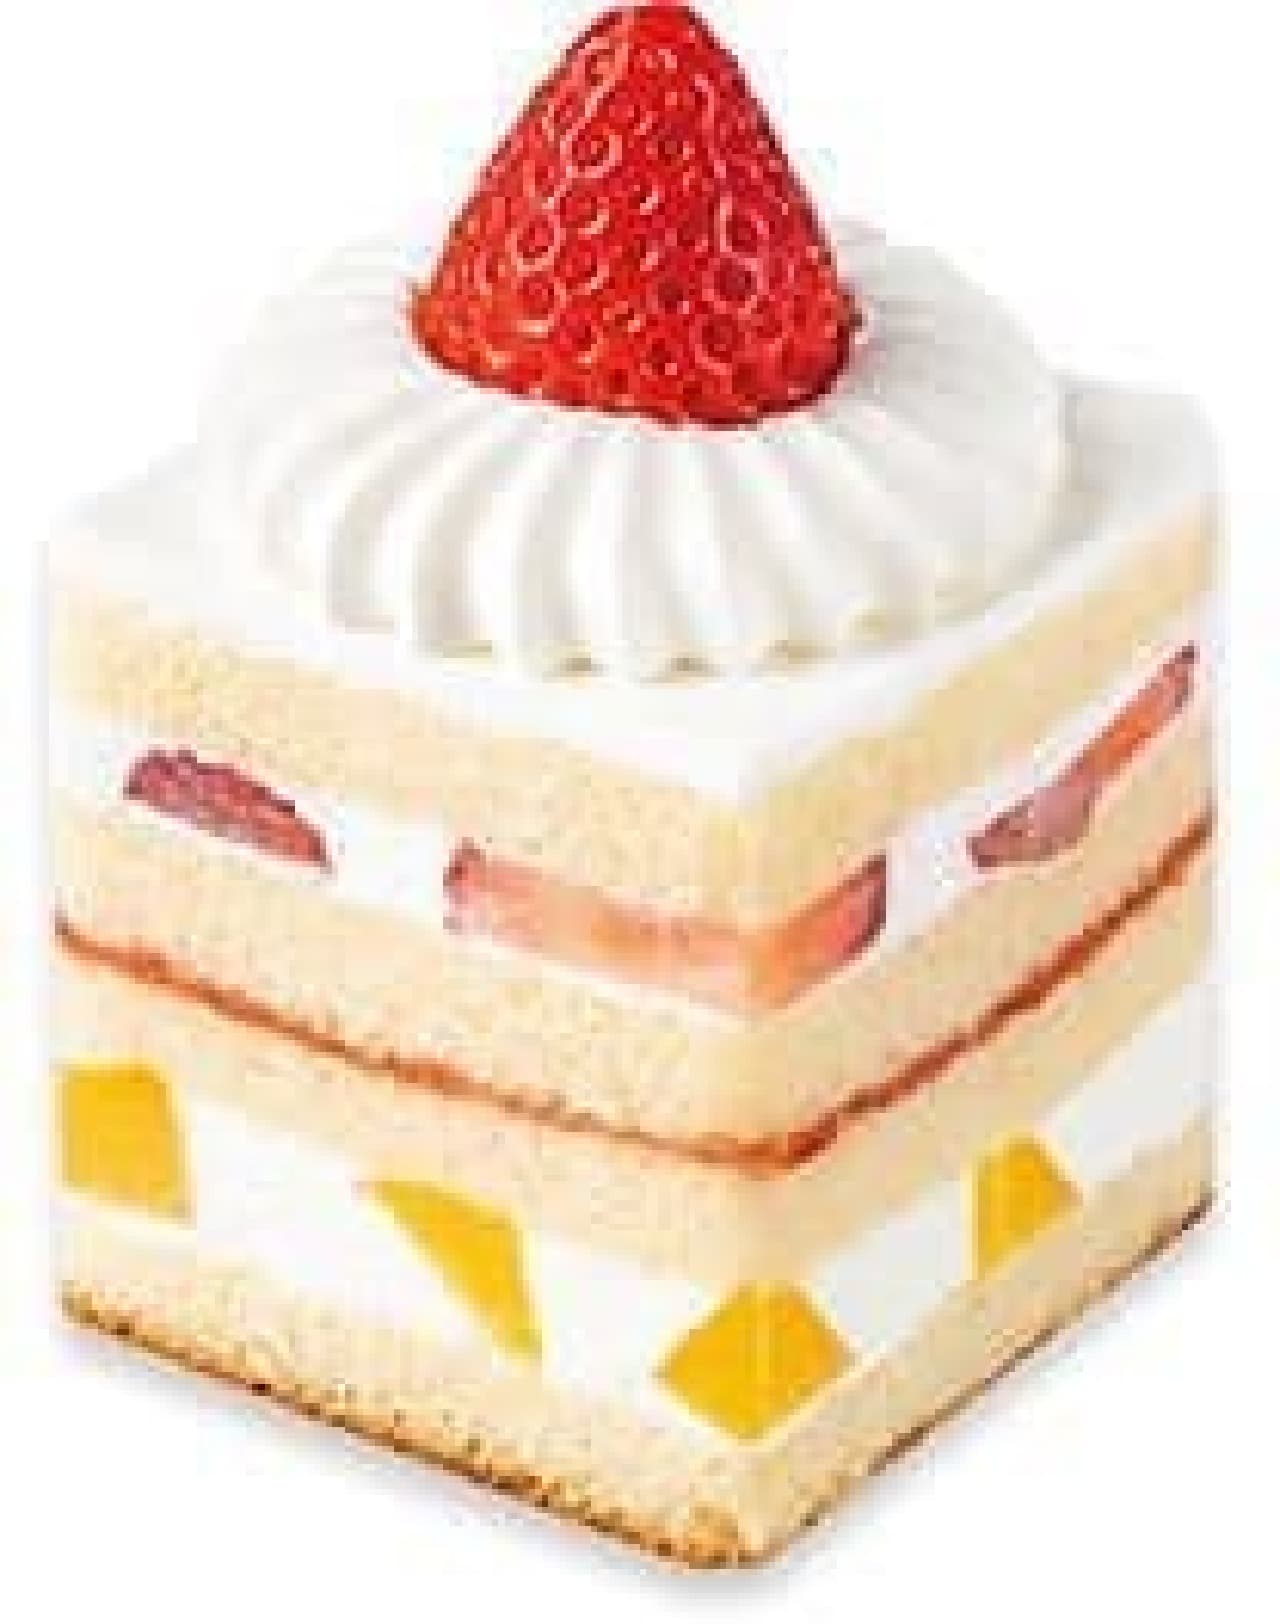 Fujiya pastry shop "Strawberry and Fruit Square Short"